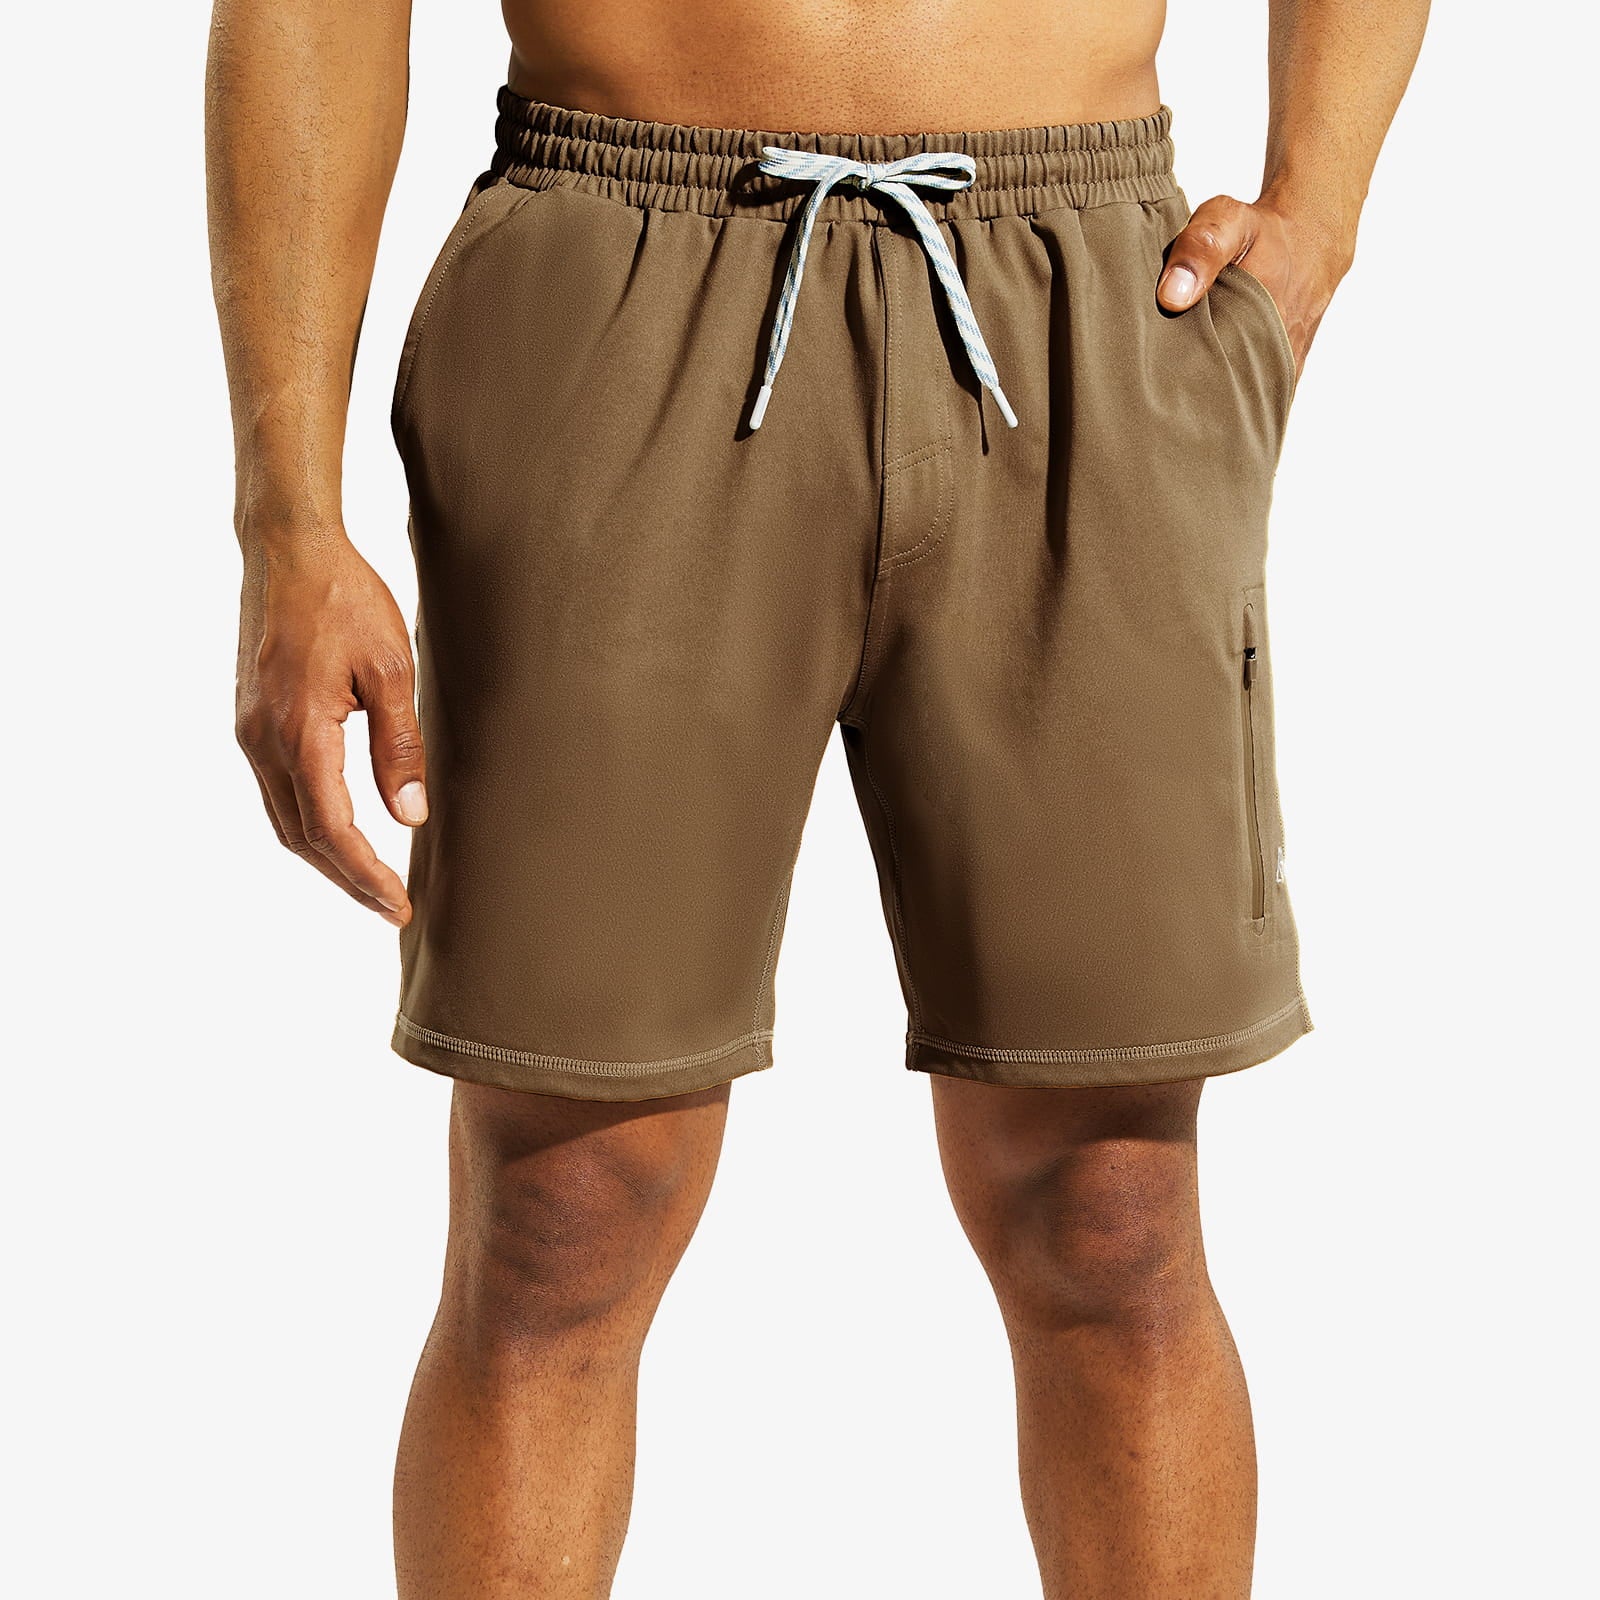 Haimont Men's Dry Fit Athletic Gym Shorts with Pockets